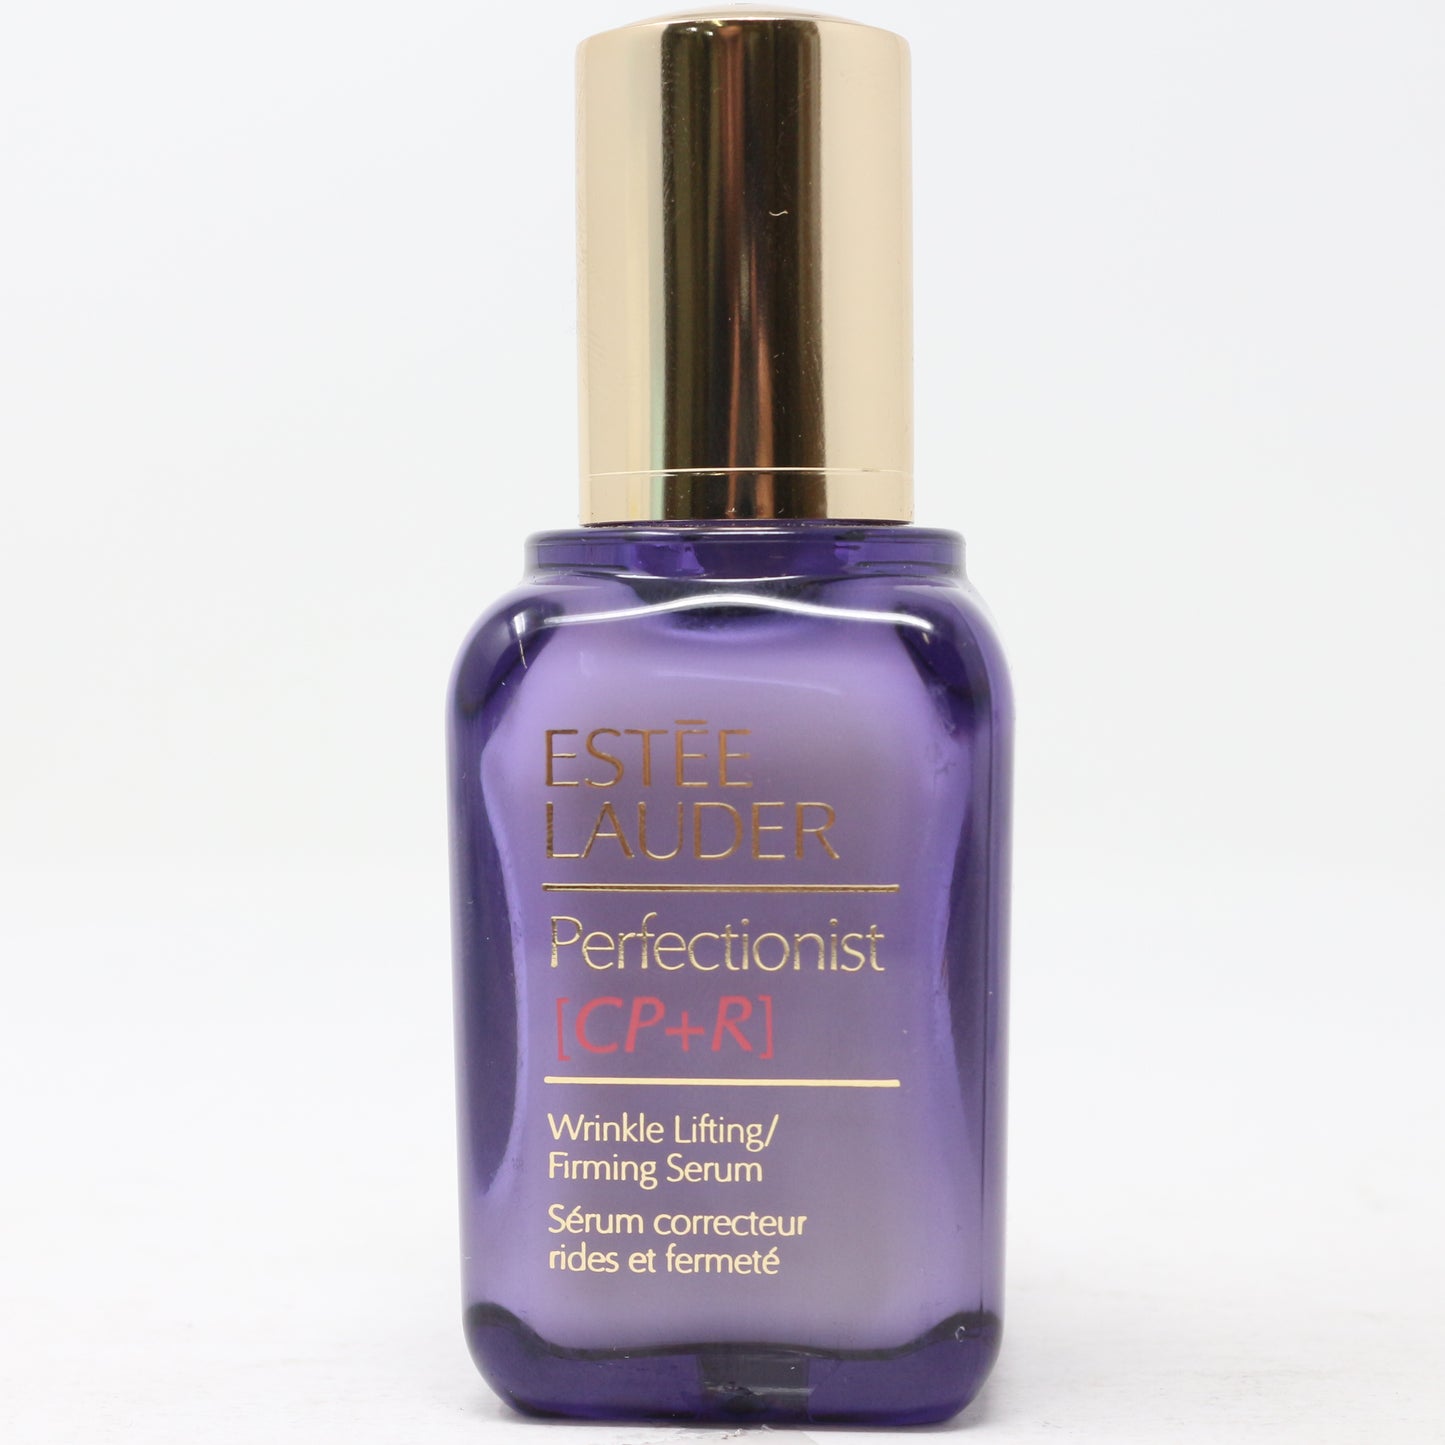 Perfectionist Wrinkle Lifting/Firming Serum 50 mL